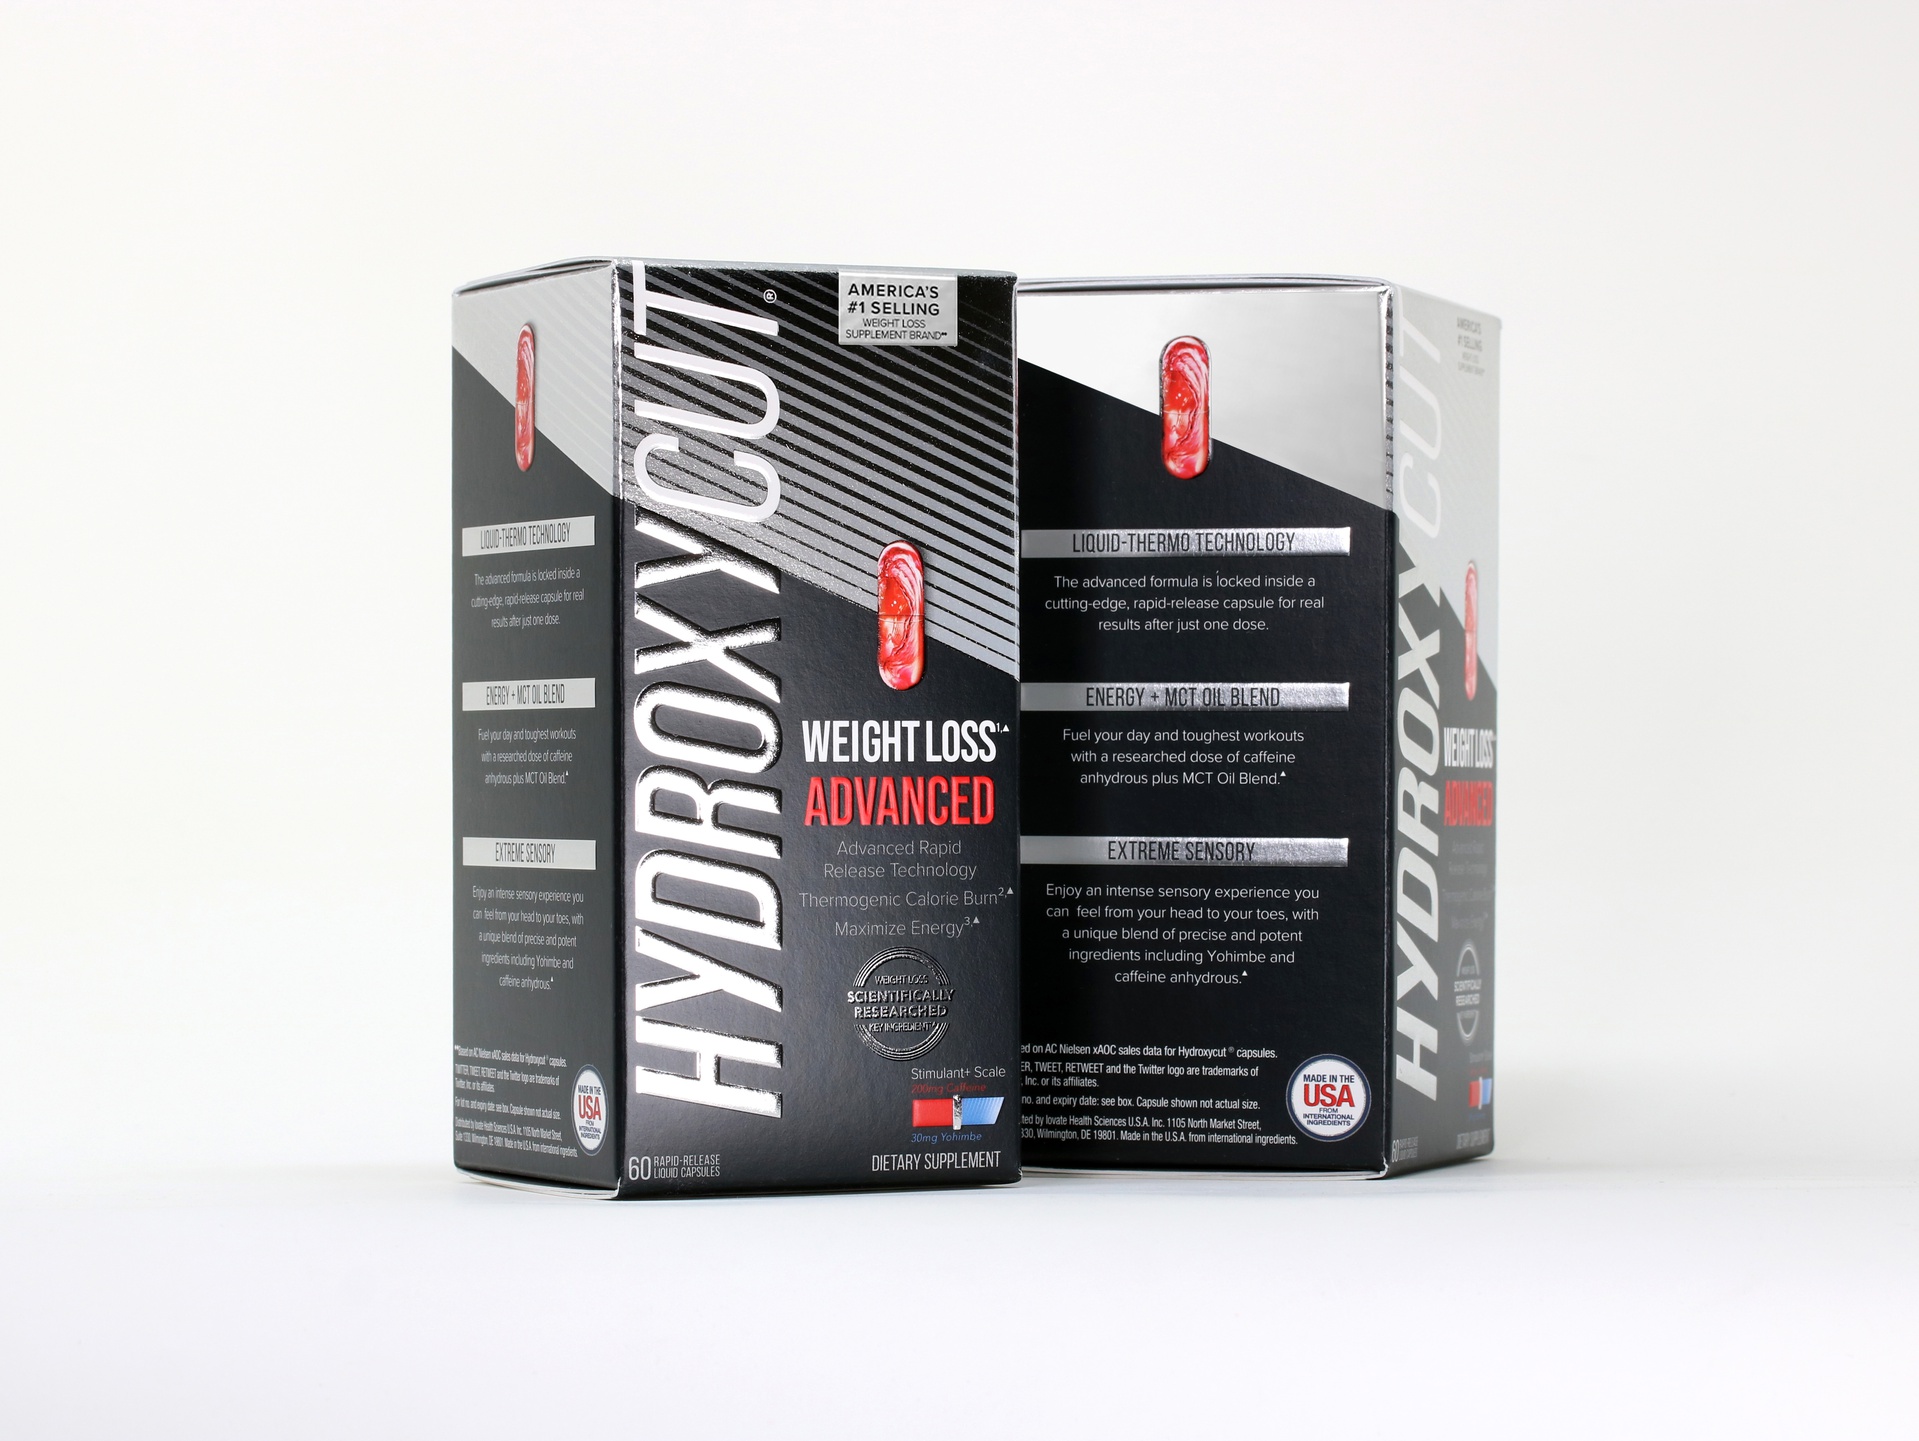 Iovate Hydroxycut Advanced packaging